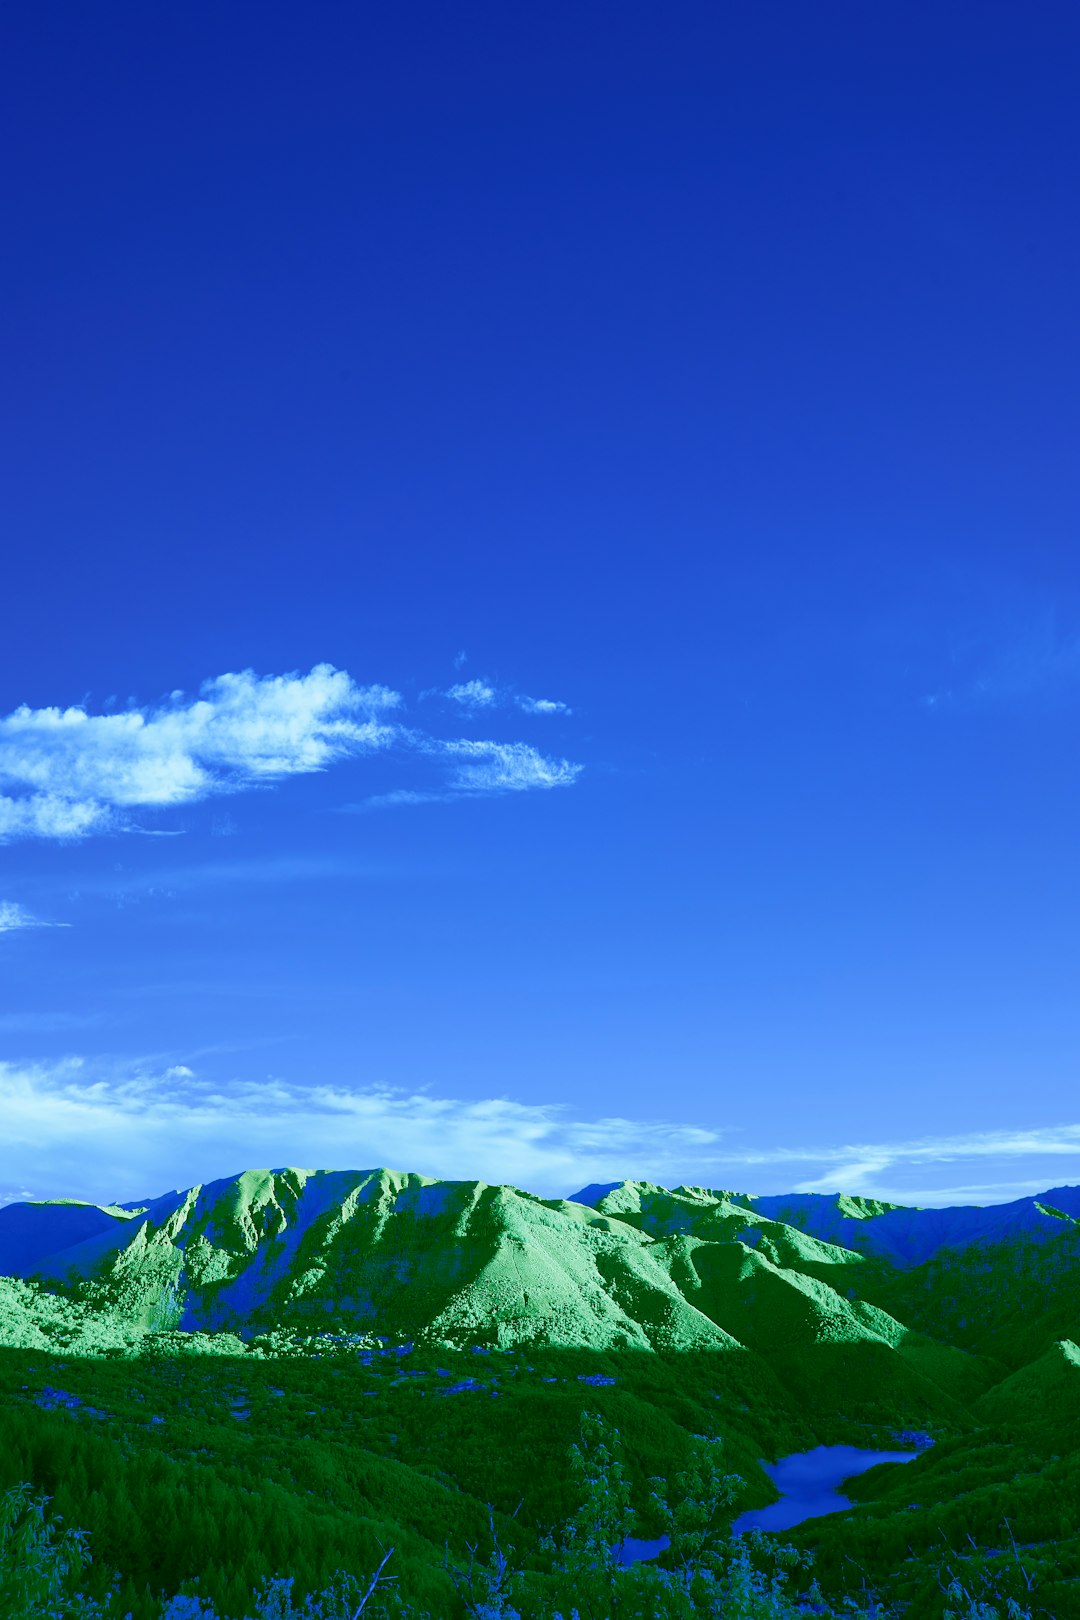 green mountains under blue sky during daytime